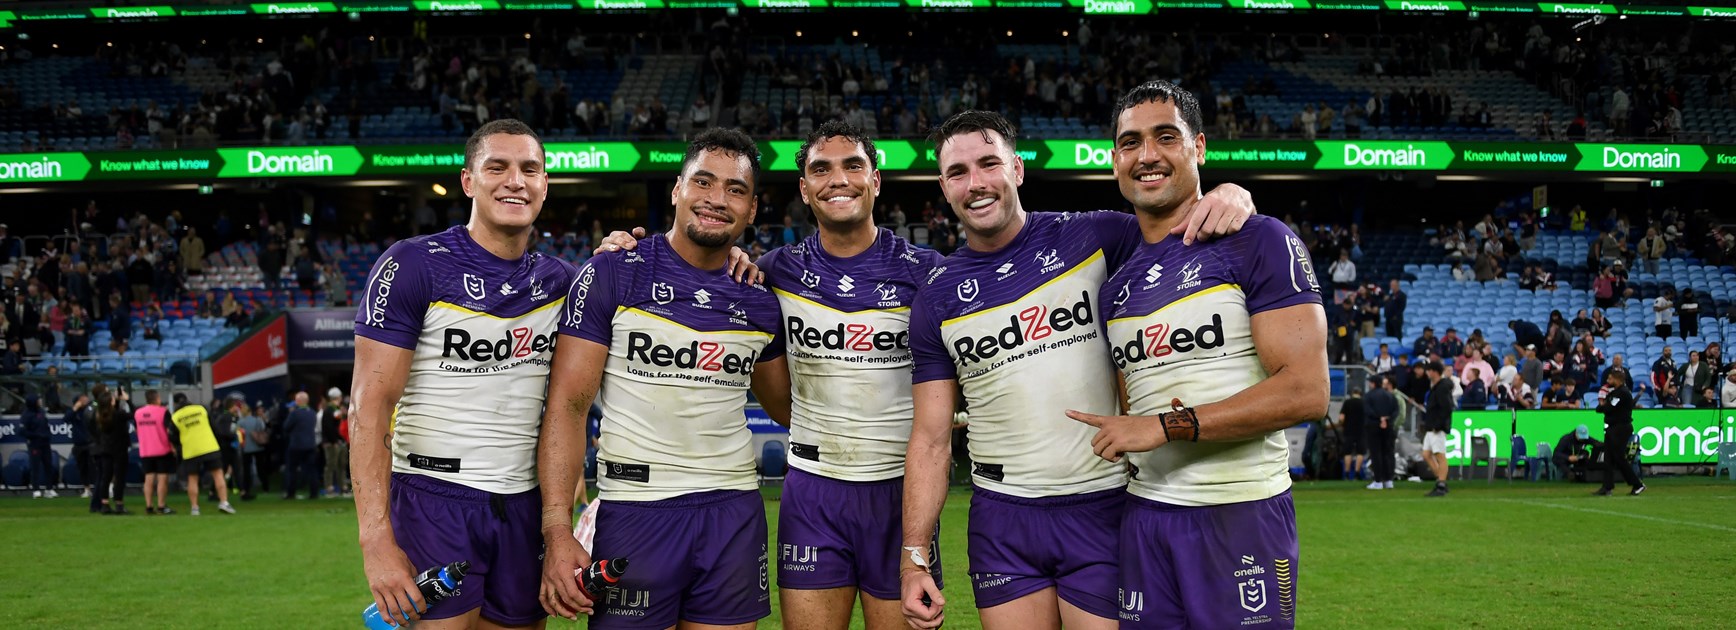 Storm warning: How a revamped attack has Melbourne back in contention